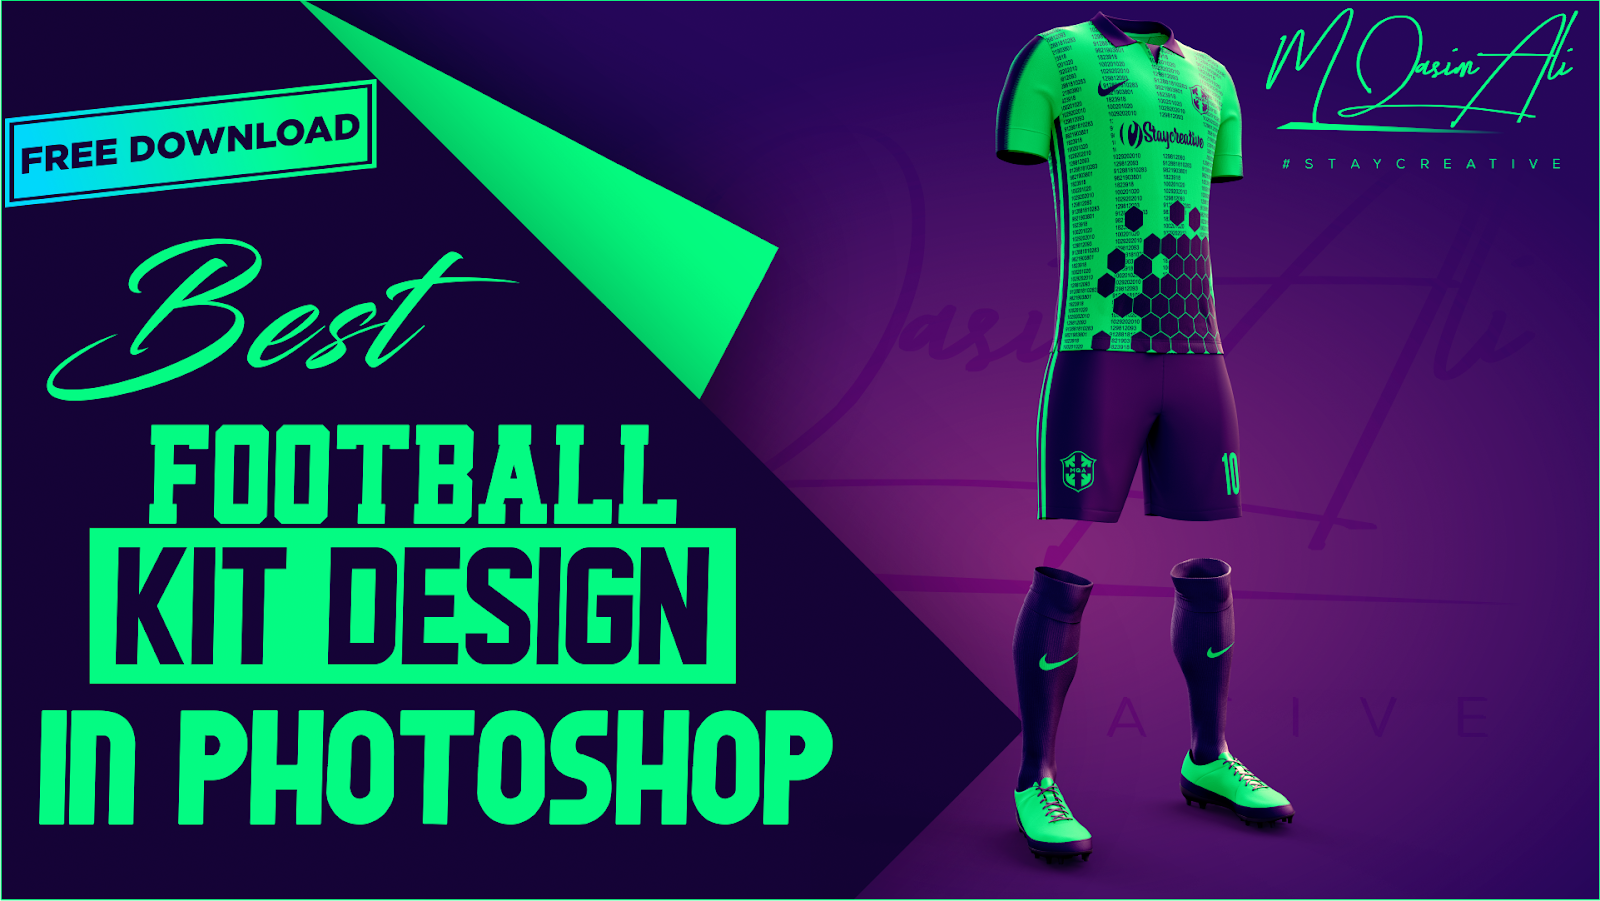 Download Free 3687+ Football Kit Design Mockup Yellowimages Mockups these mockups if you need to present your logo and other branding projects.